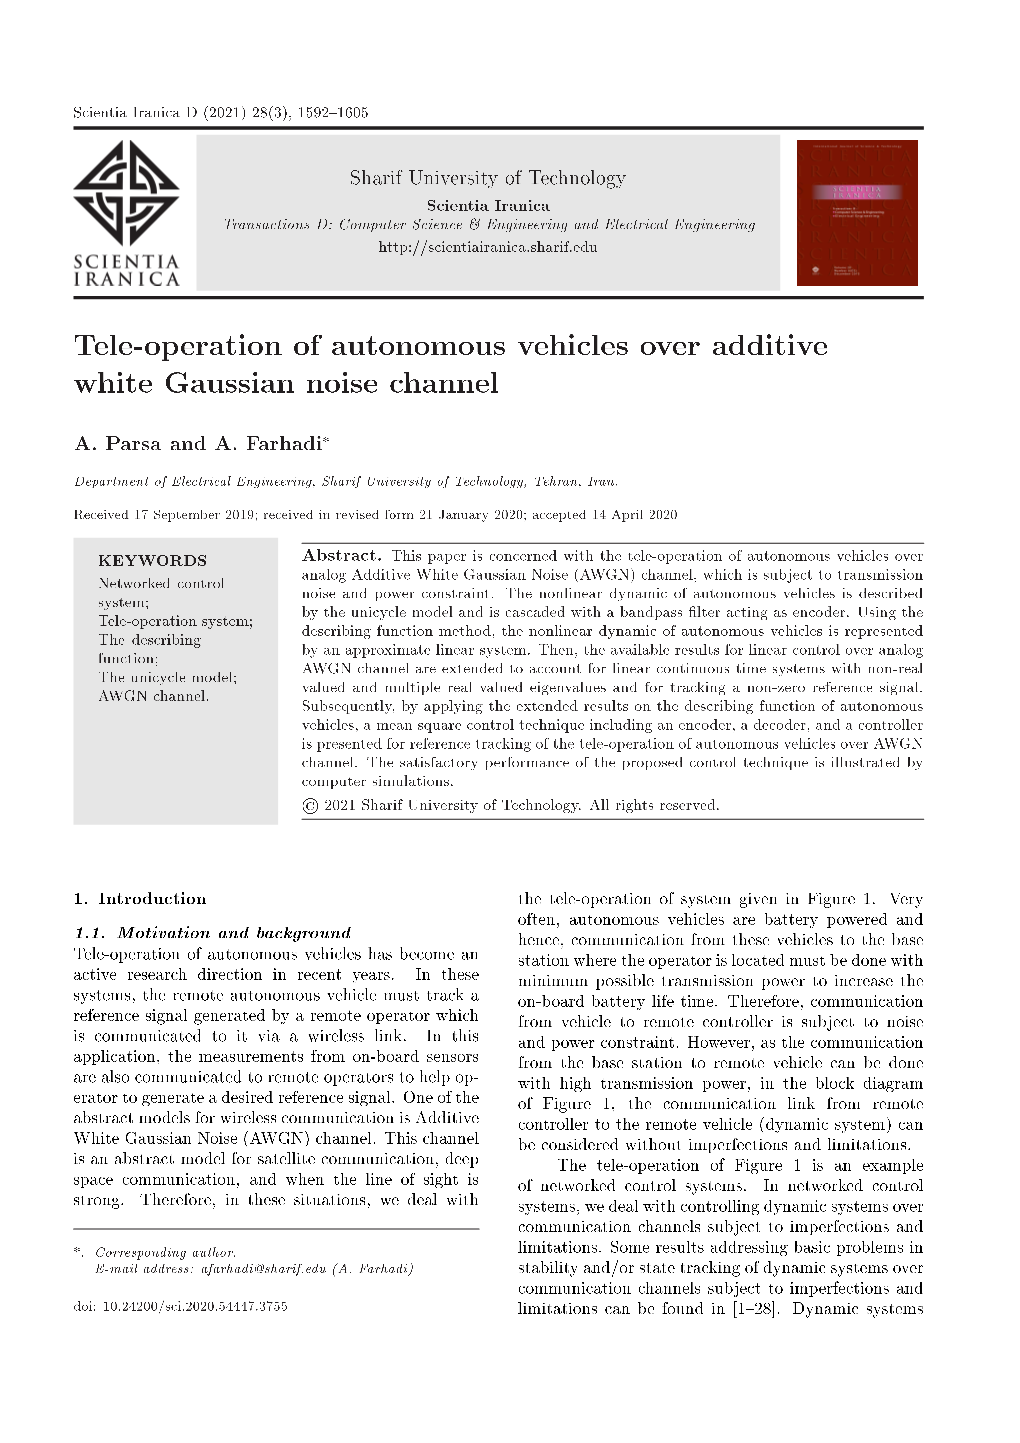 Tele-Operation of Autonomous Vehicles Over Additive White Gaussian Noise Channel